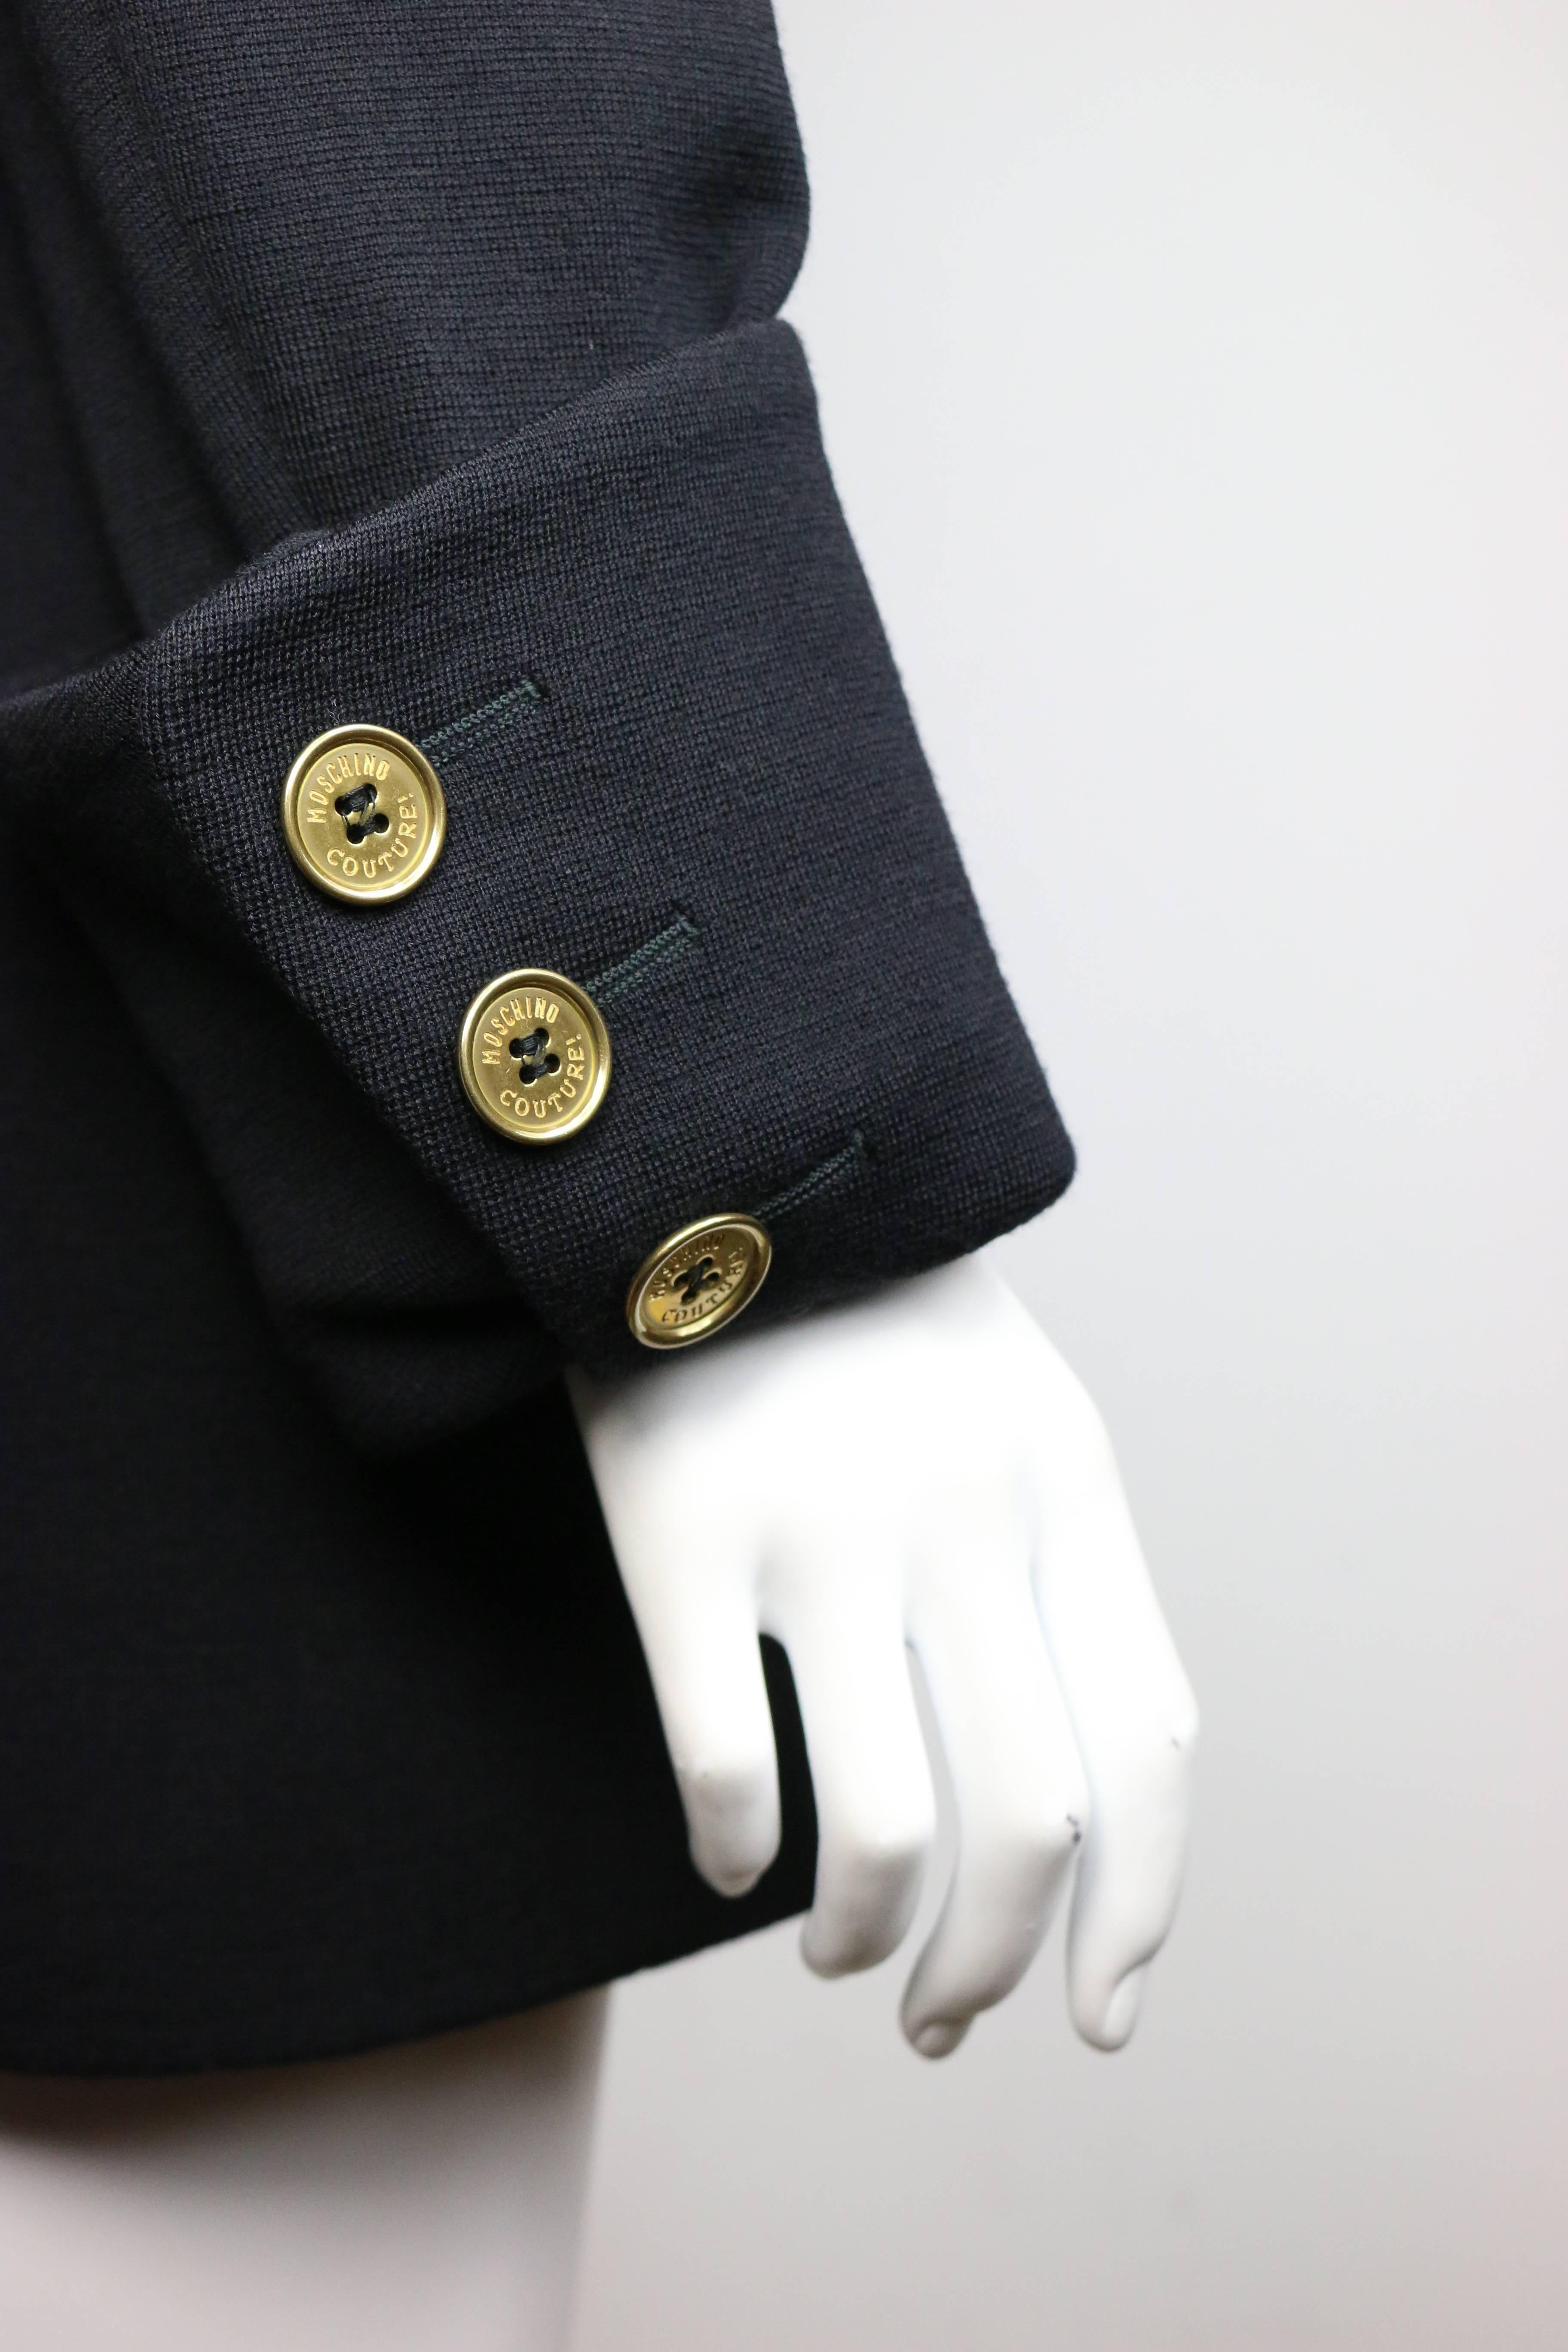 black double breasted jacket with gold buttons